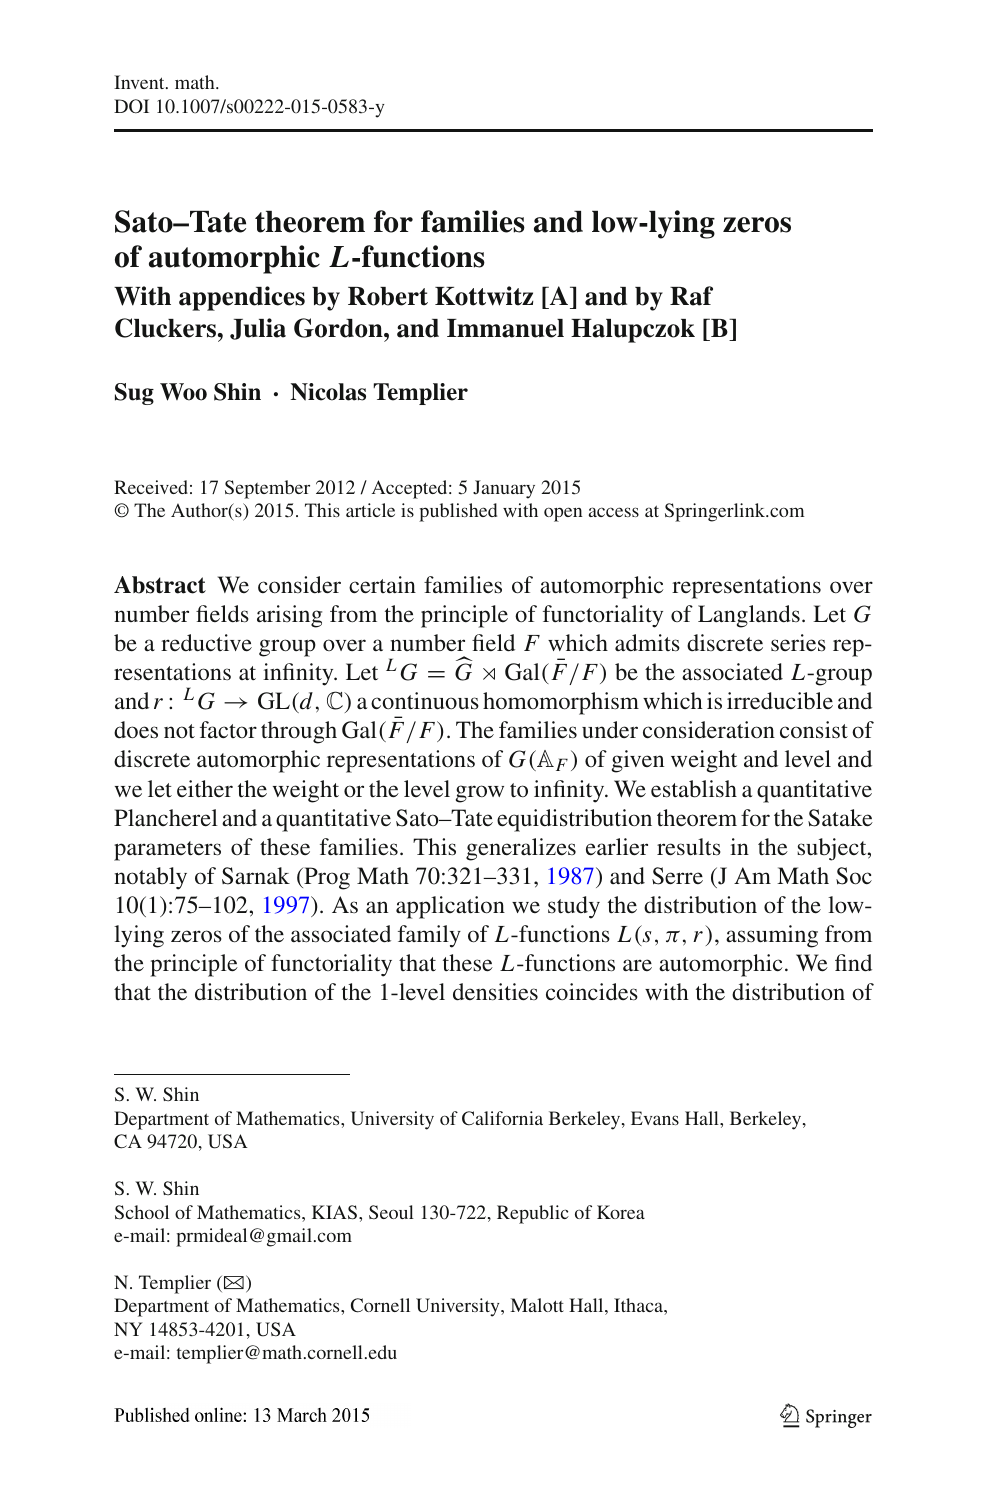 Sato Tate Theorem For Families And Low Lying Zeros Of Automorphic L L Functions Topic Of Research Paper In Mathematics Download Scholarly Article Pdf And Read For Free On Cyberleninka Open Science Hub